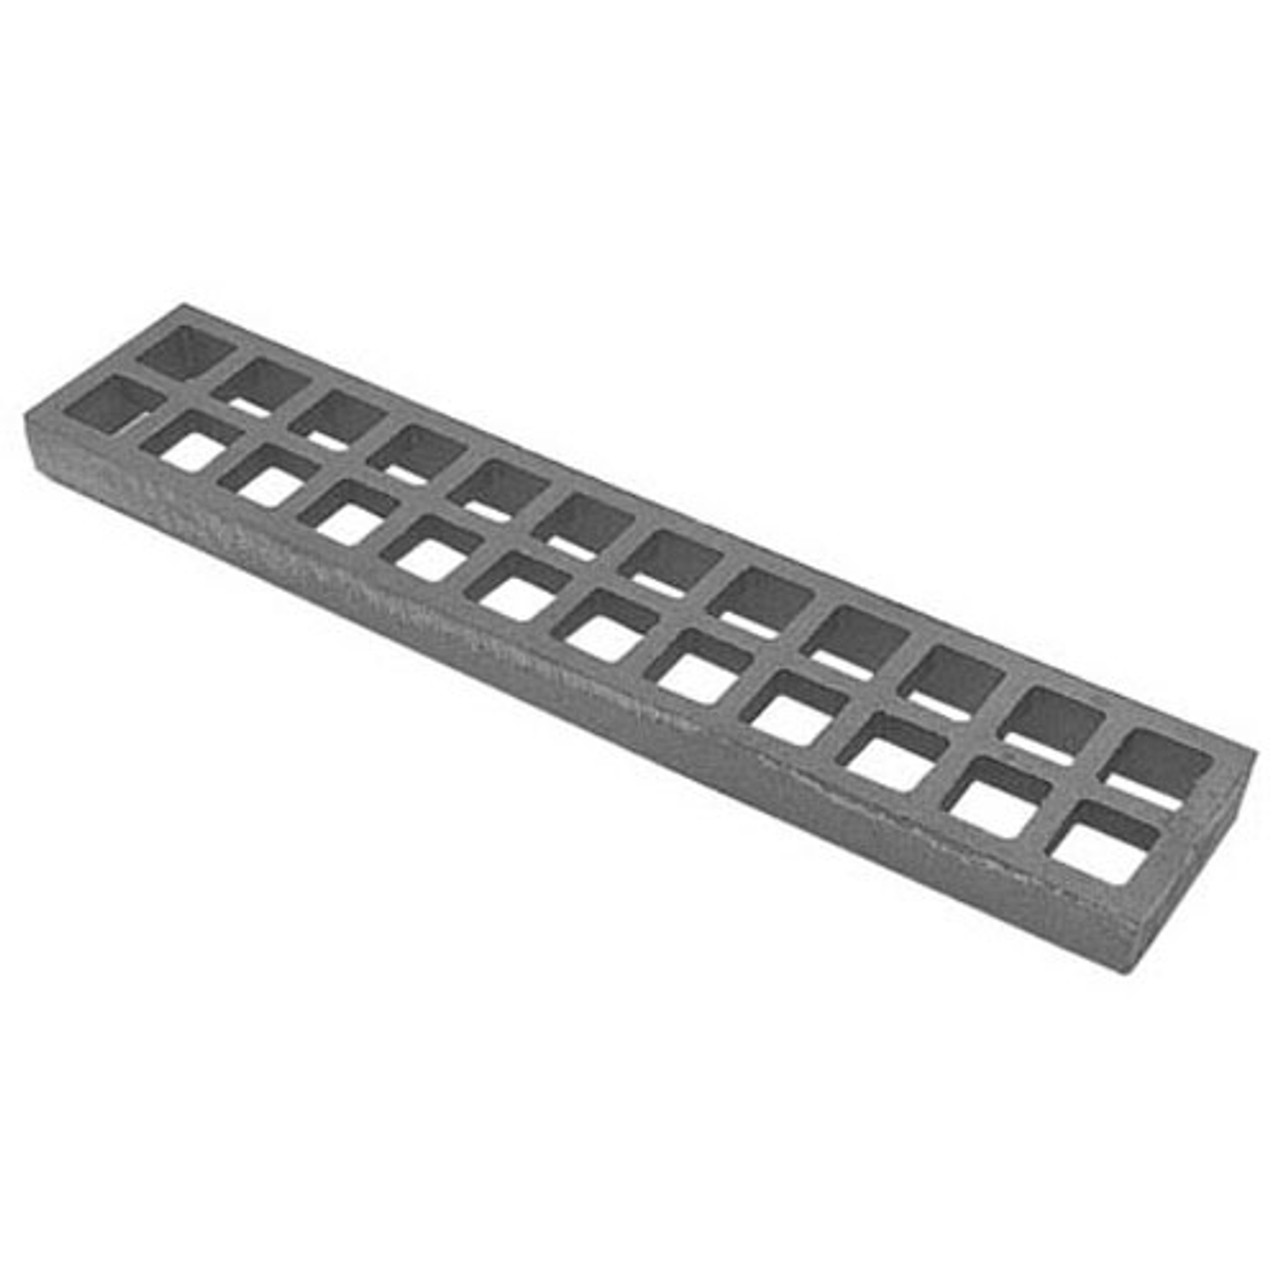 Bottom Grate 15 X 3 - Replacement Part For Rankin Delux RANRDLR02A